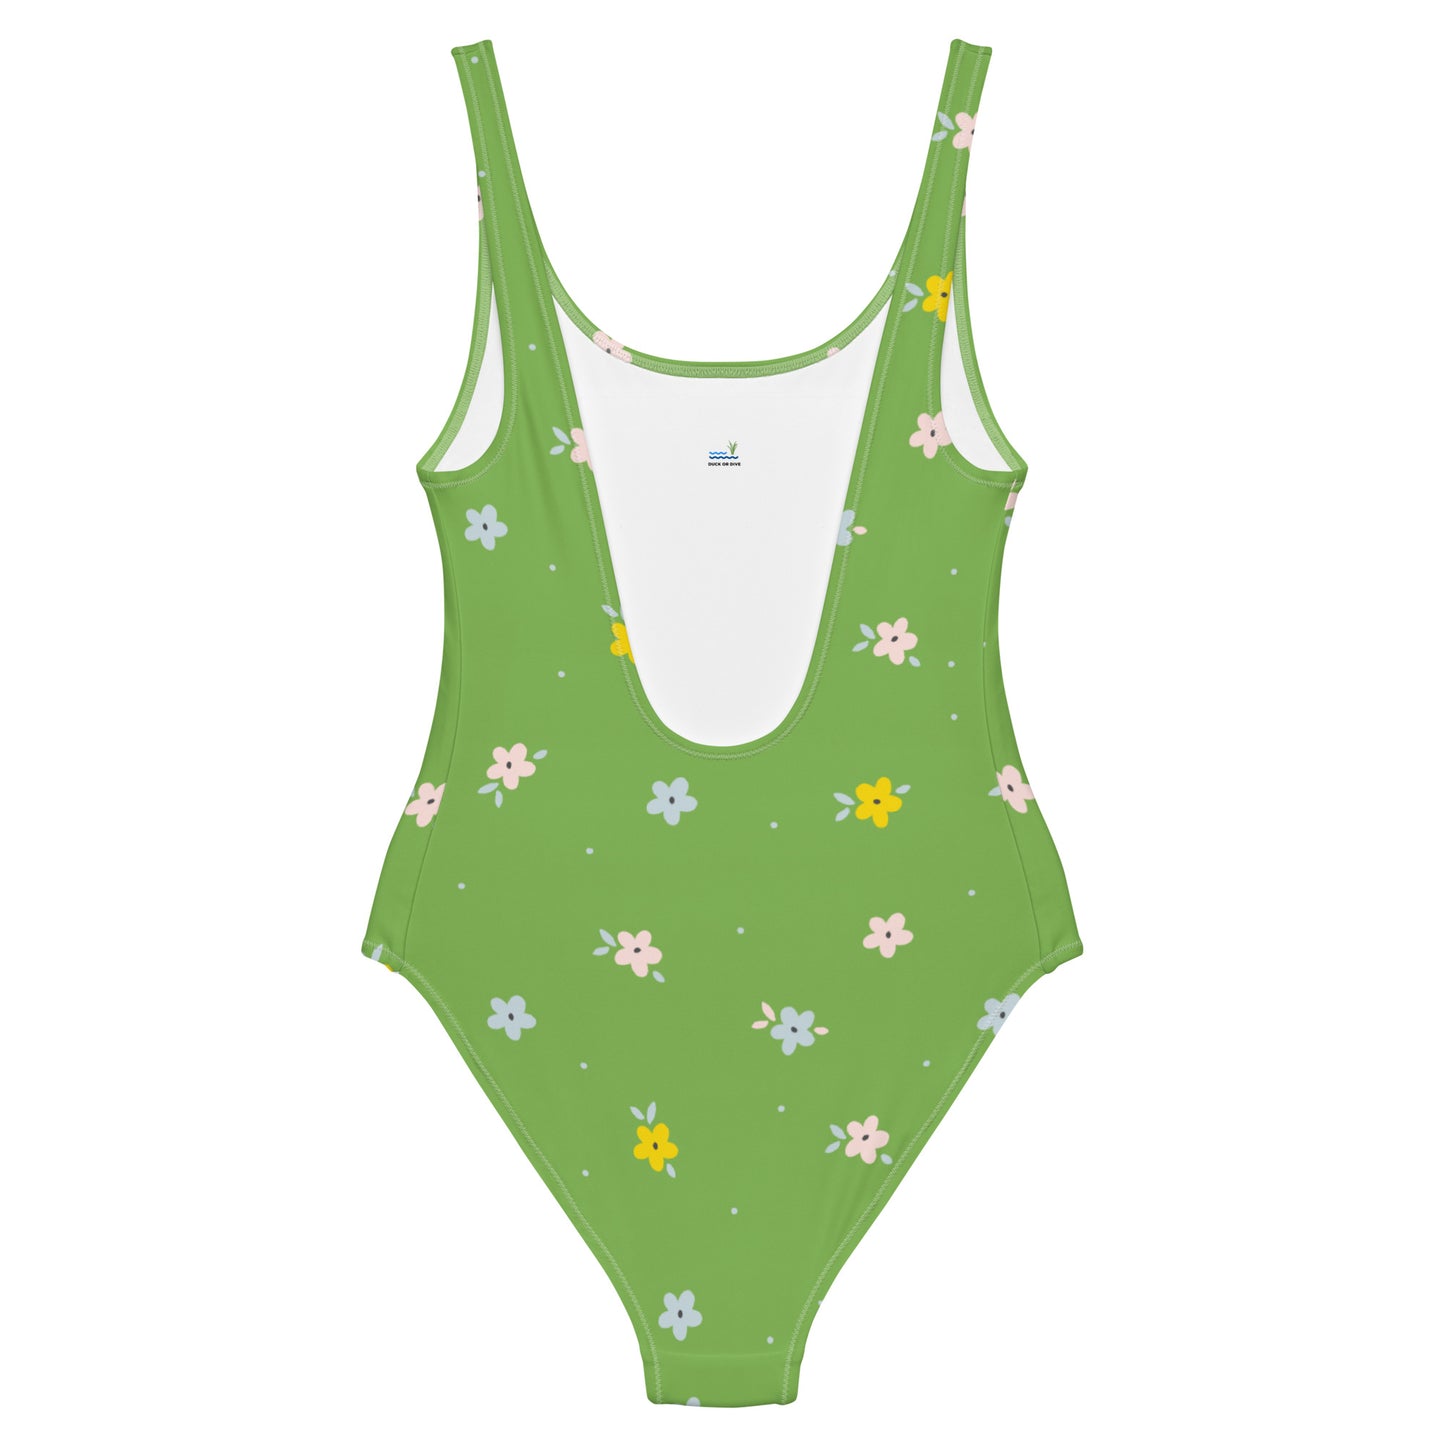 Spring Green One-Piece Swimsuit